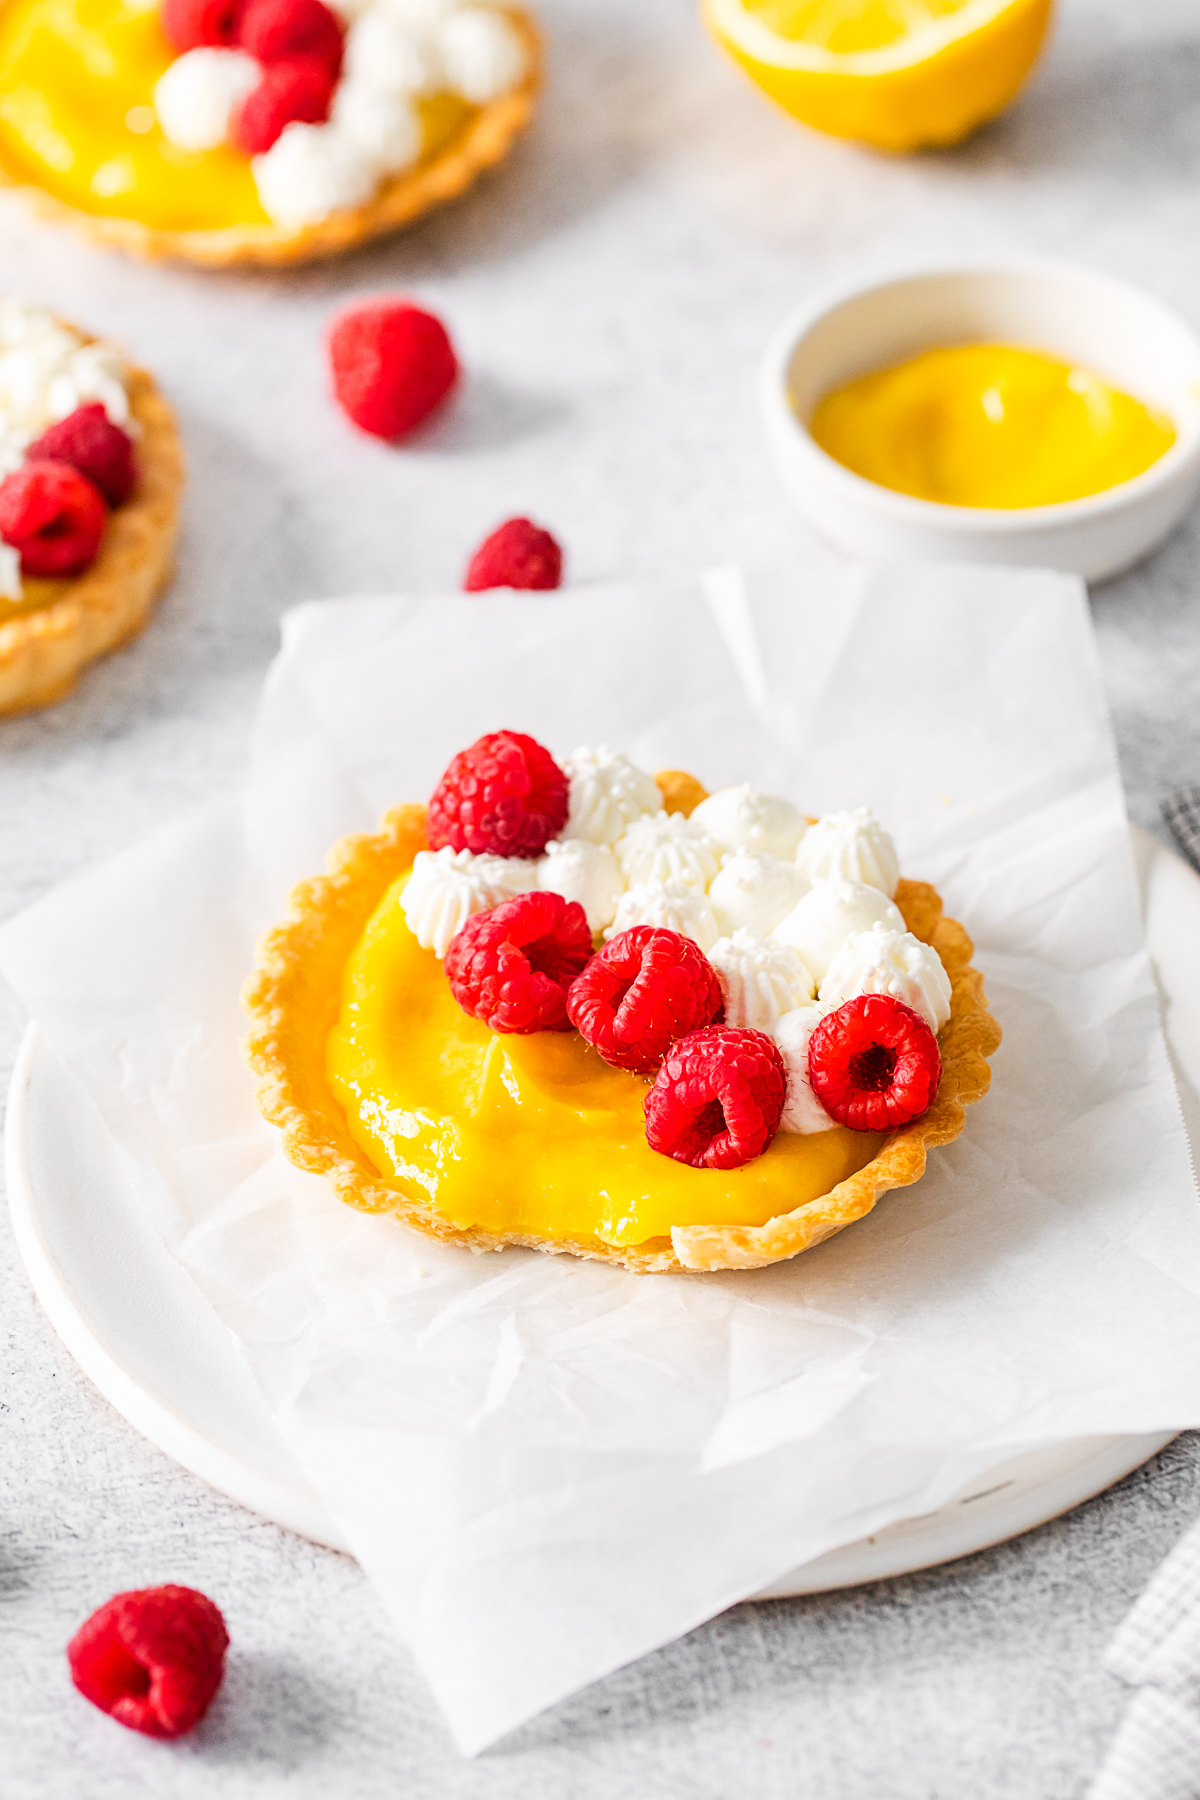 Lemon Curd Tarts topped with fresh berries.